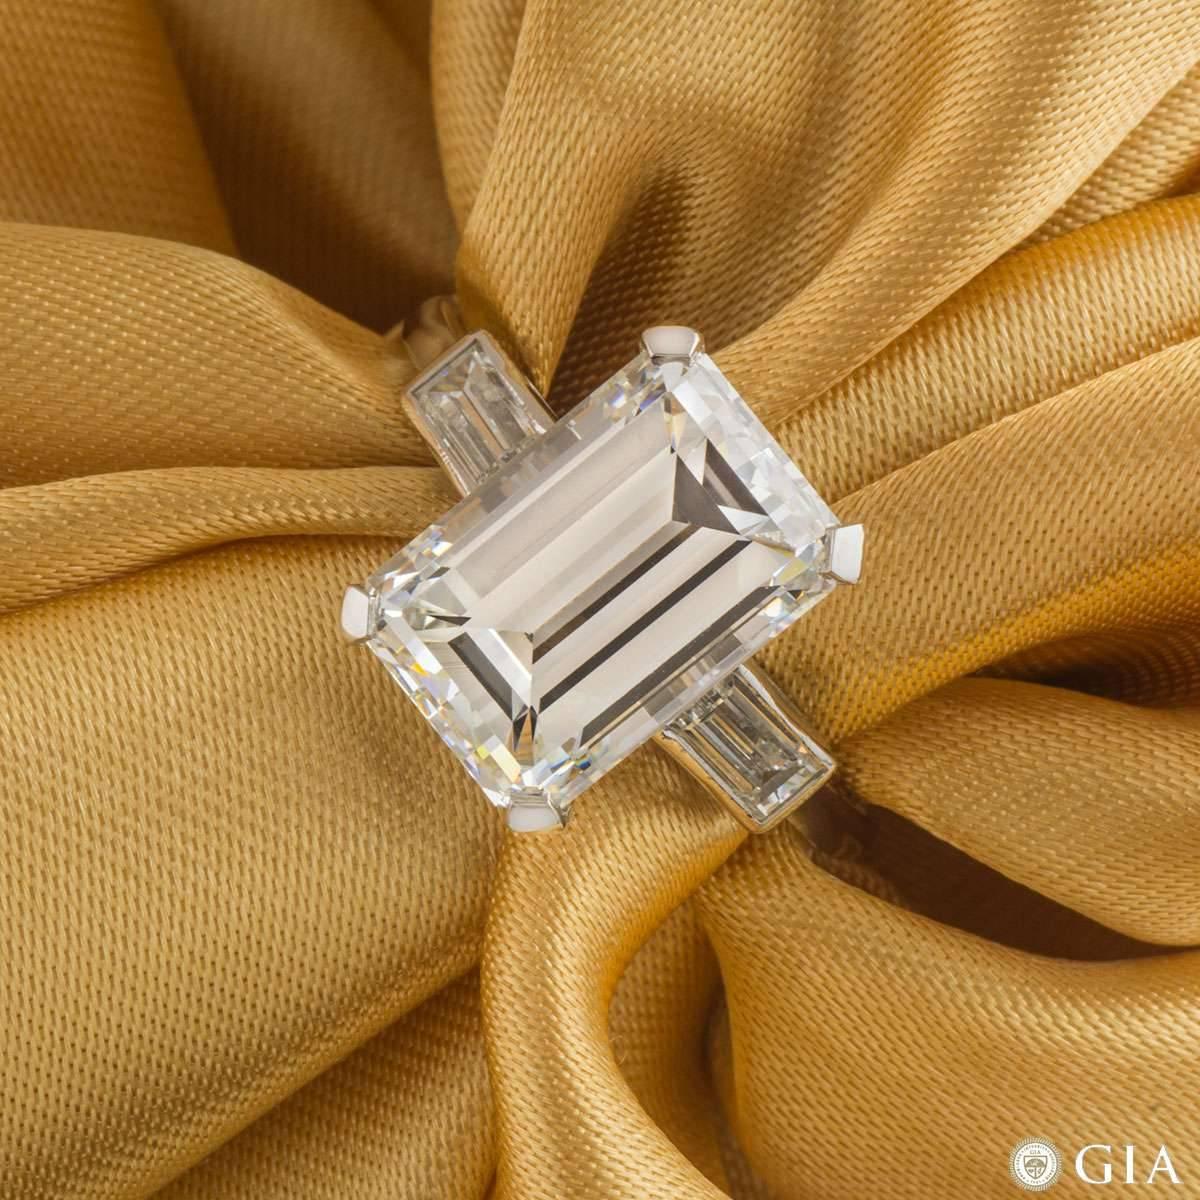 An exquisite diamond ring in platinum. The central claw set emerald cut diamond weighs 7.02ct, is H colour and VS1 in clarity. Flanked on either side are 2 baguette cut diamonds in a rubover setting, totalling approximately 0.80ct and well matched